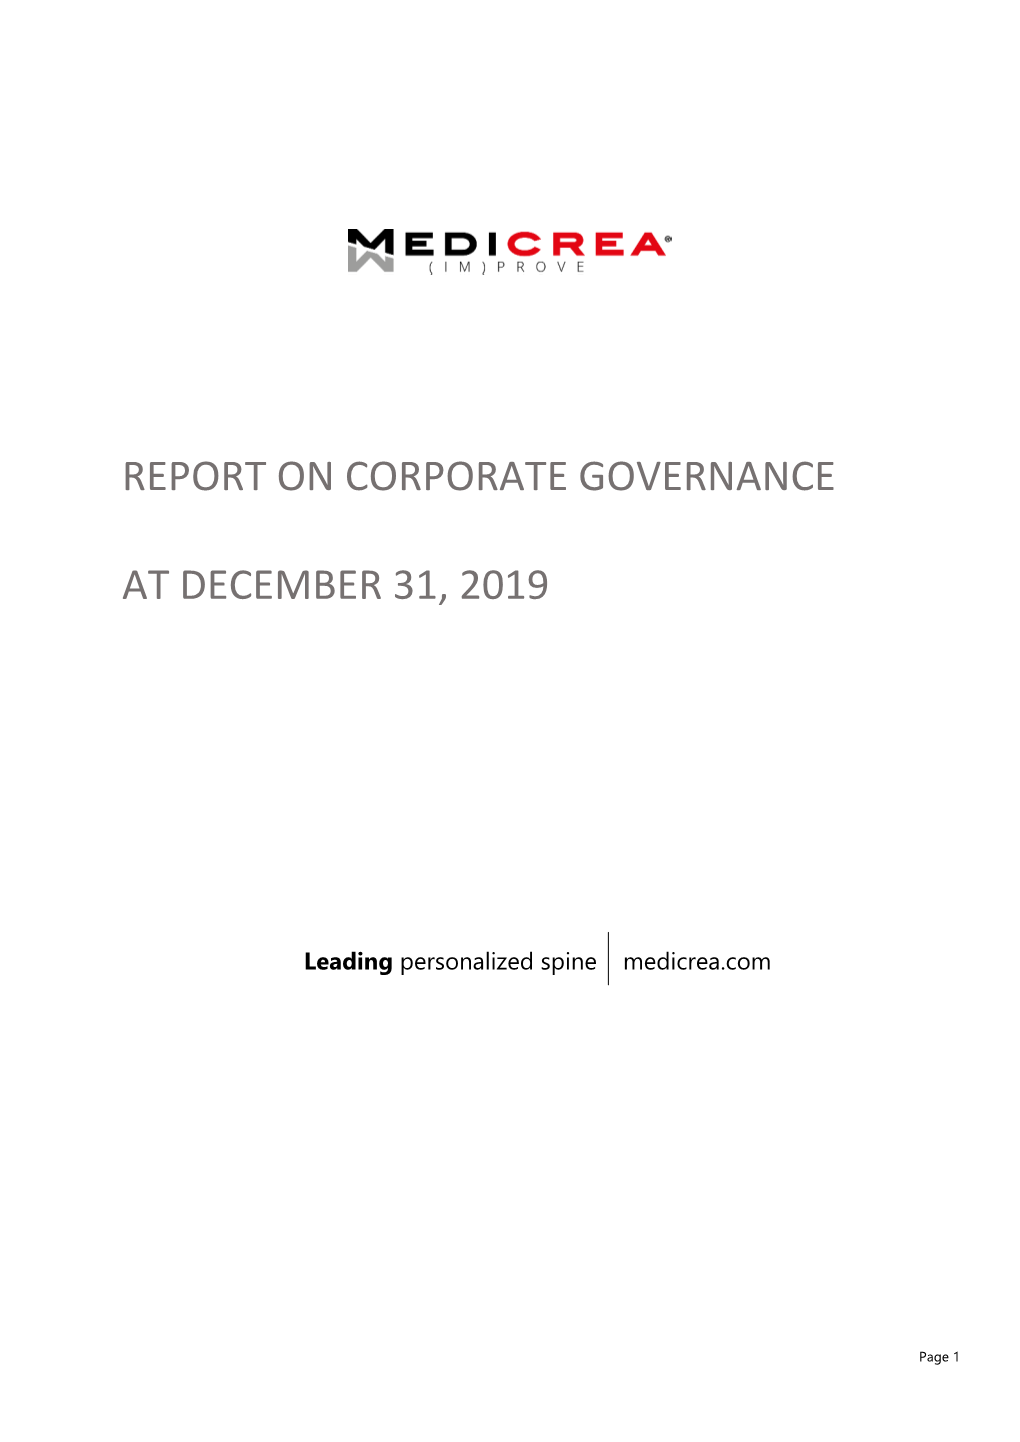 Report on Corporate Governance at December 31